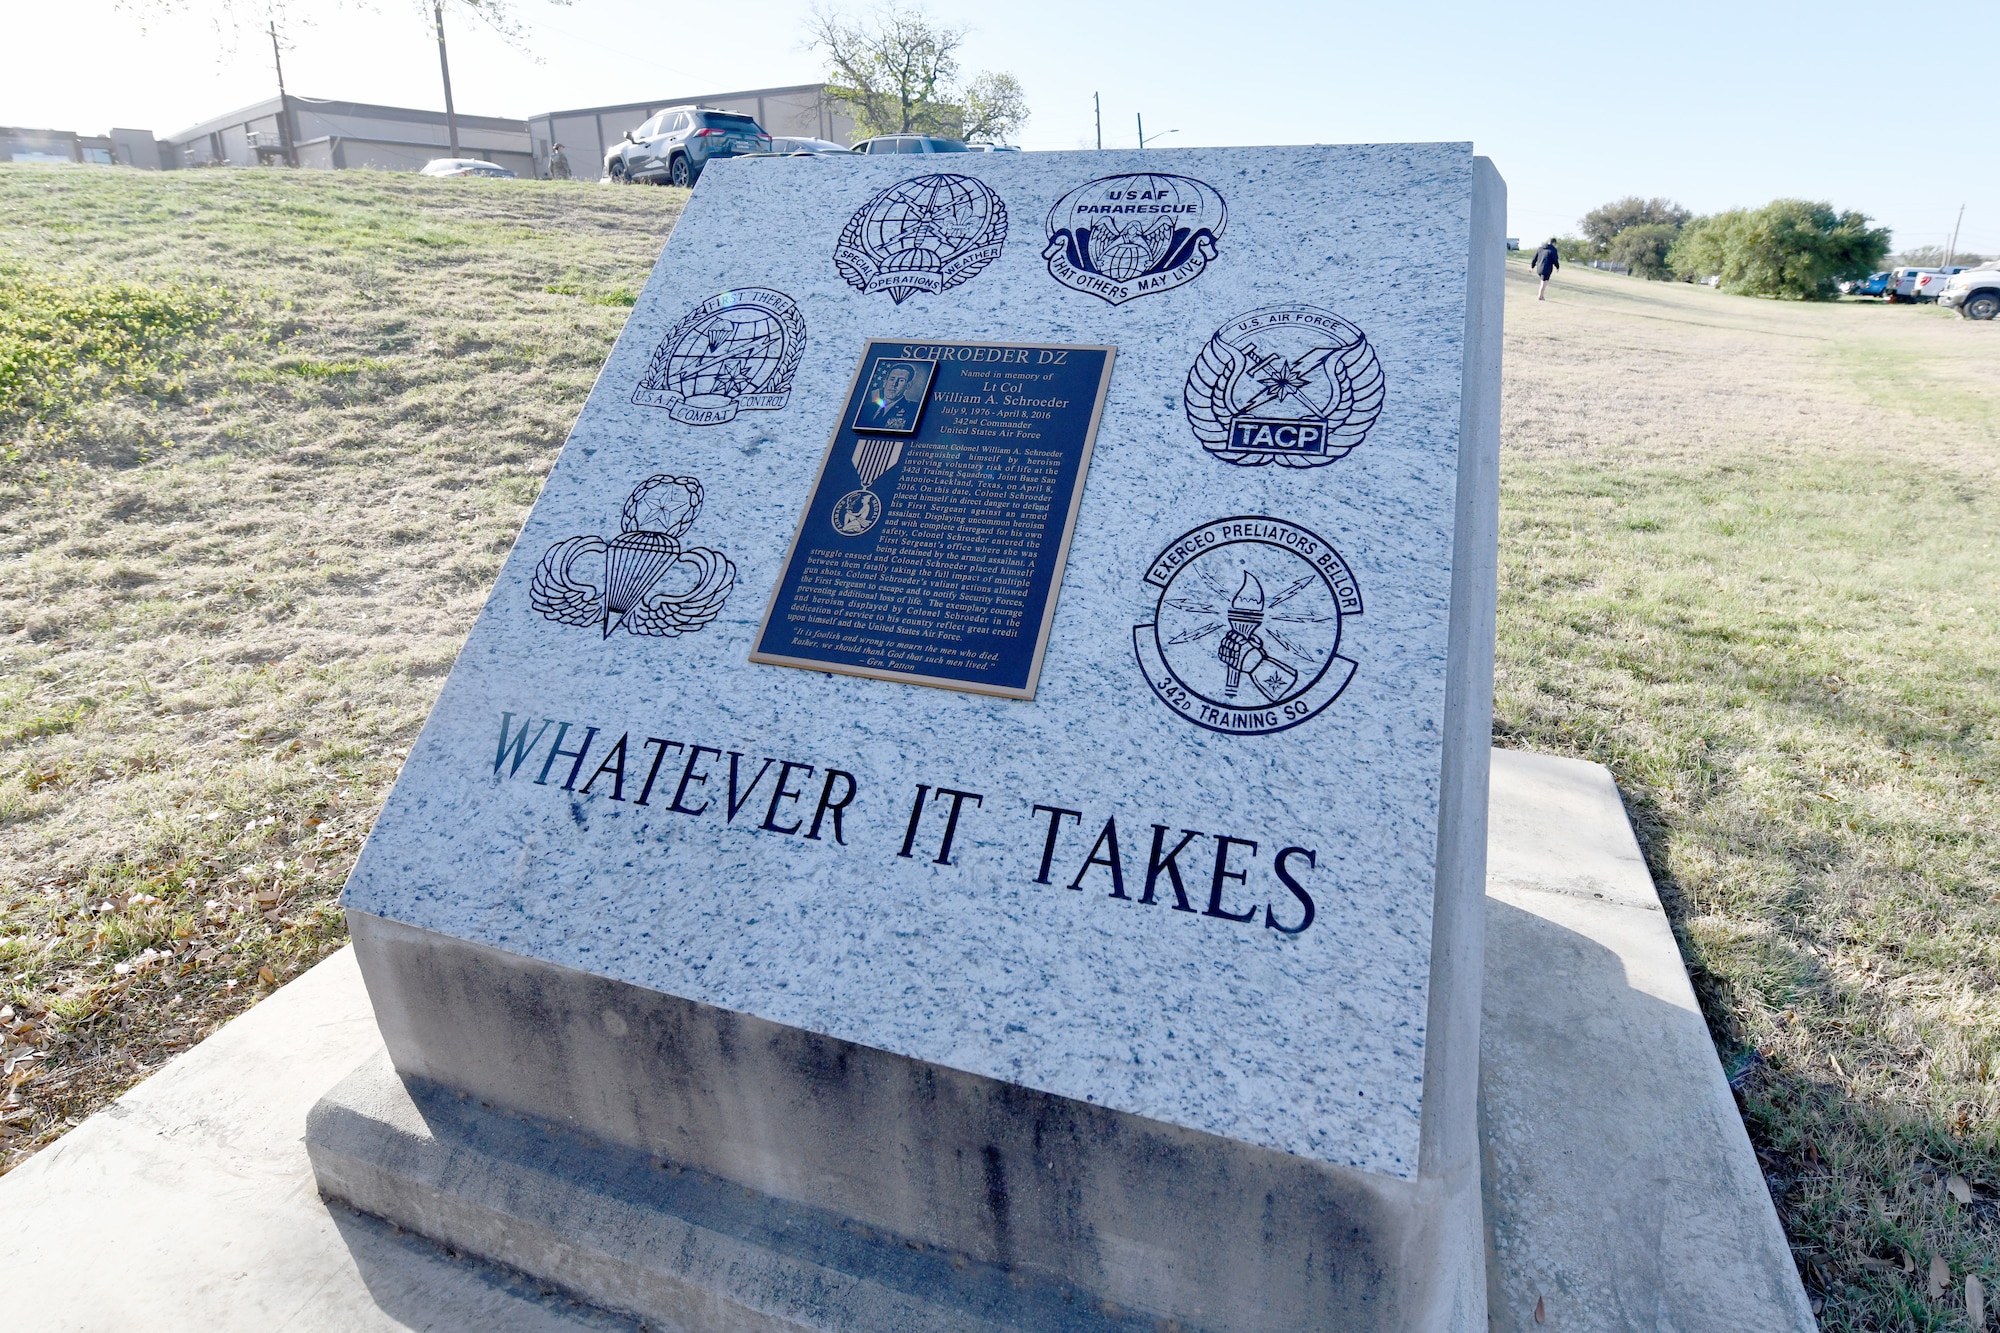 The newly refitted memorial for U.S. Air Force Lt. Col. William Schroeder at the Special Warfare Training Wing training compound Joint Base San Antonio, Chapman Training Annex, Apr. 8, 2022. The wing and echelon units hosted a two and one-half mile ruck march followed by Memorial pushups and the unveiling of refitted memorials in coordination with Gold Star families (U.S. Air Force photo by Brian Boisvert)